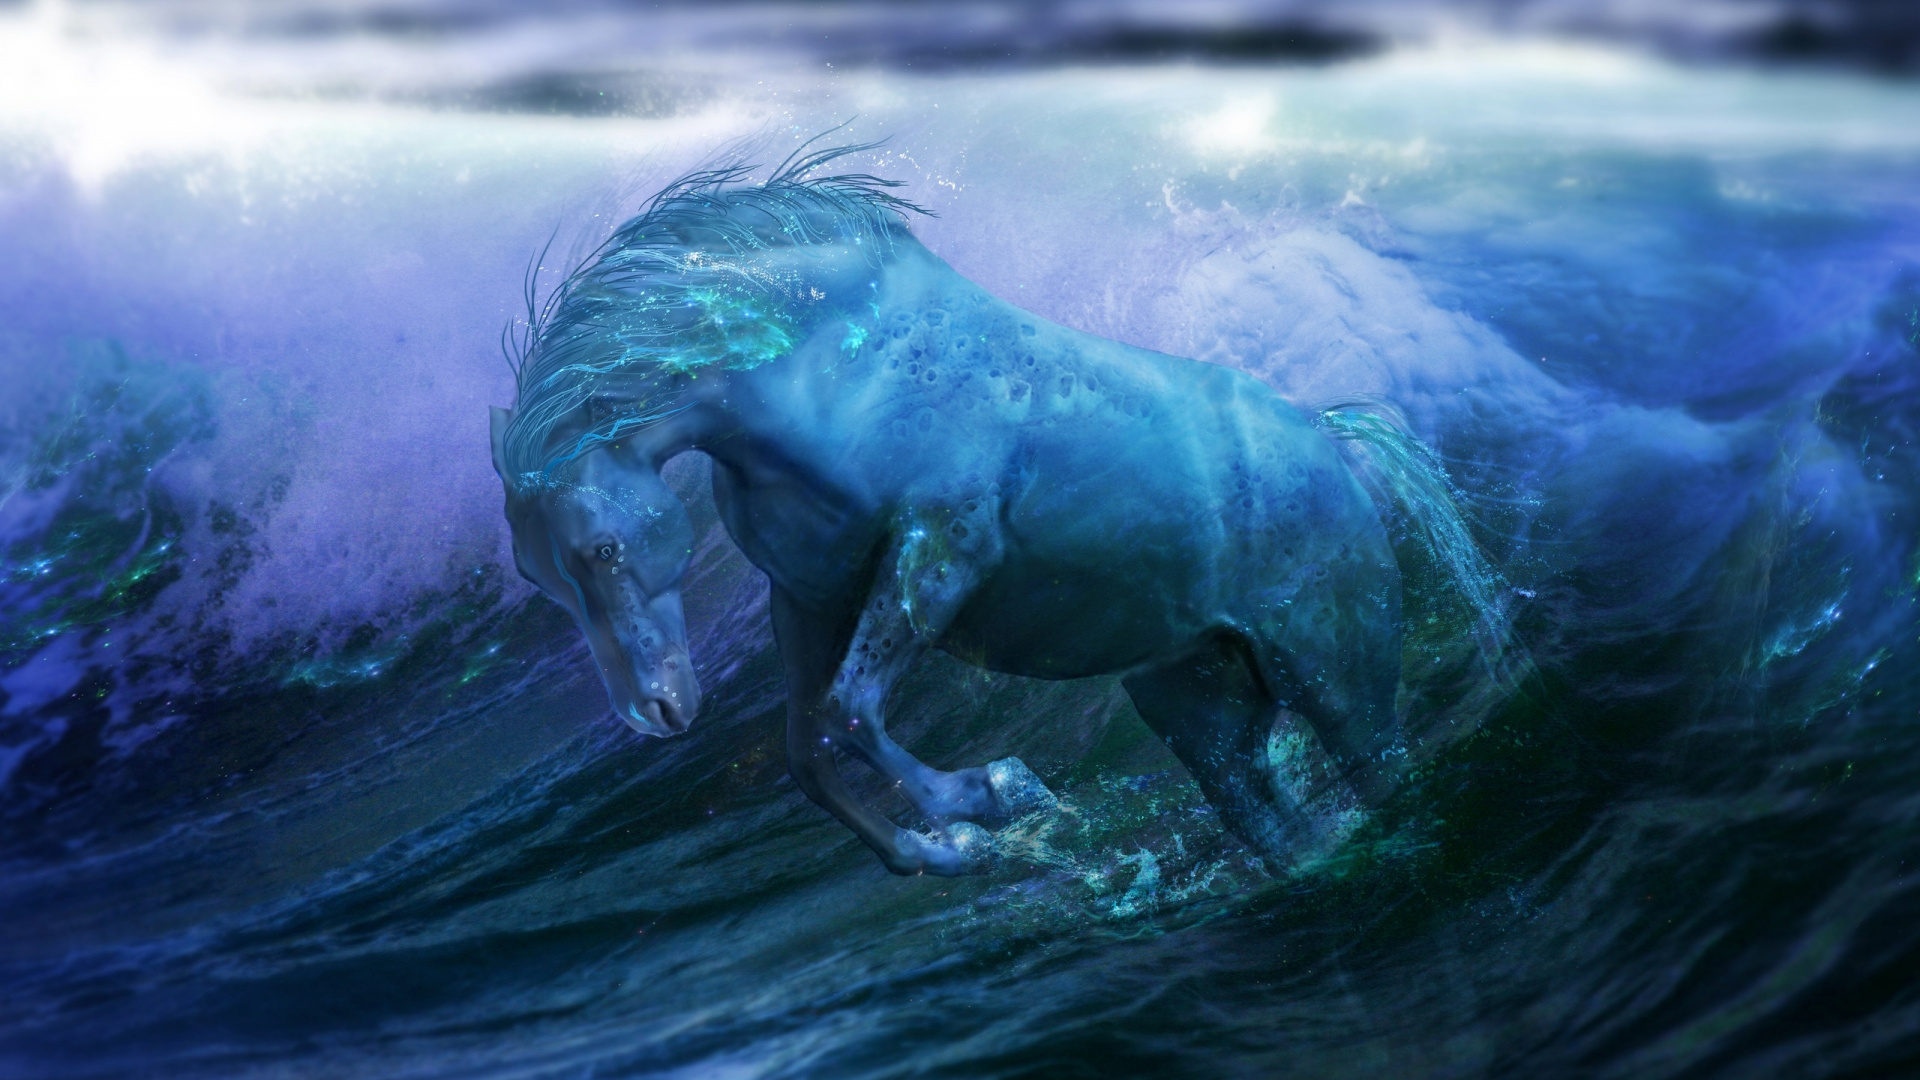 Blue and White Horse Running on Water. Wallpaper in 1920x1080 Resolution